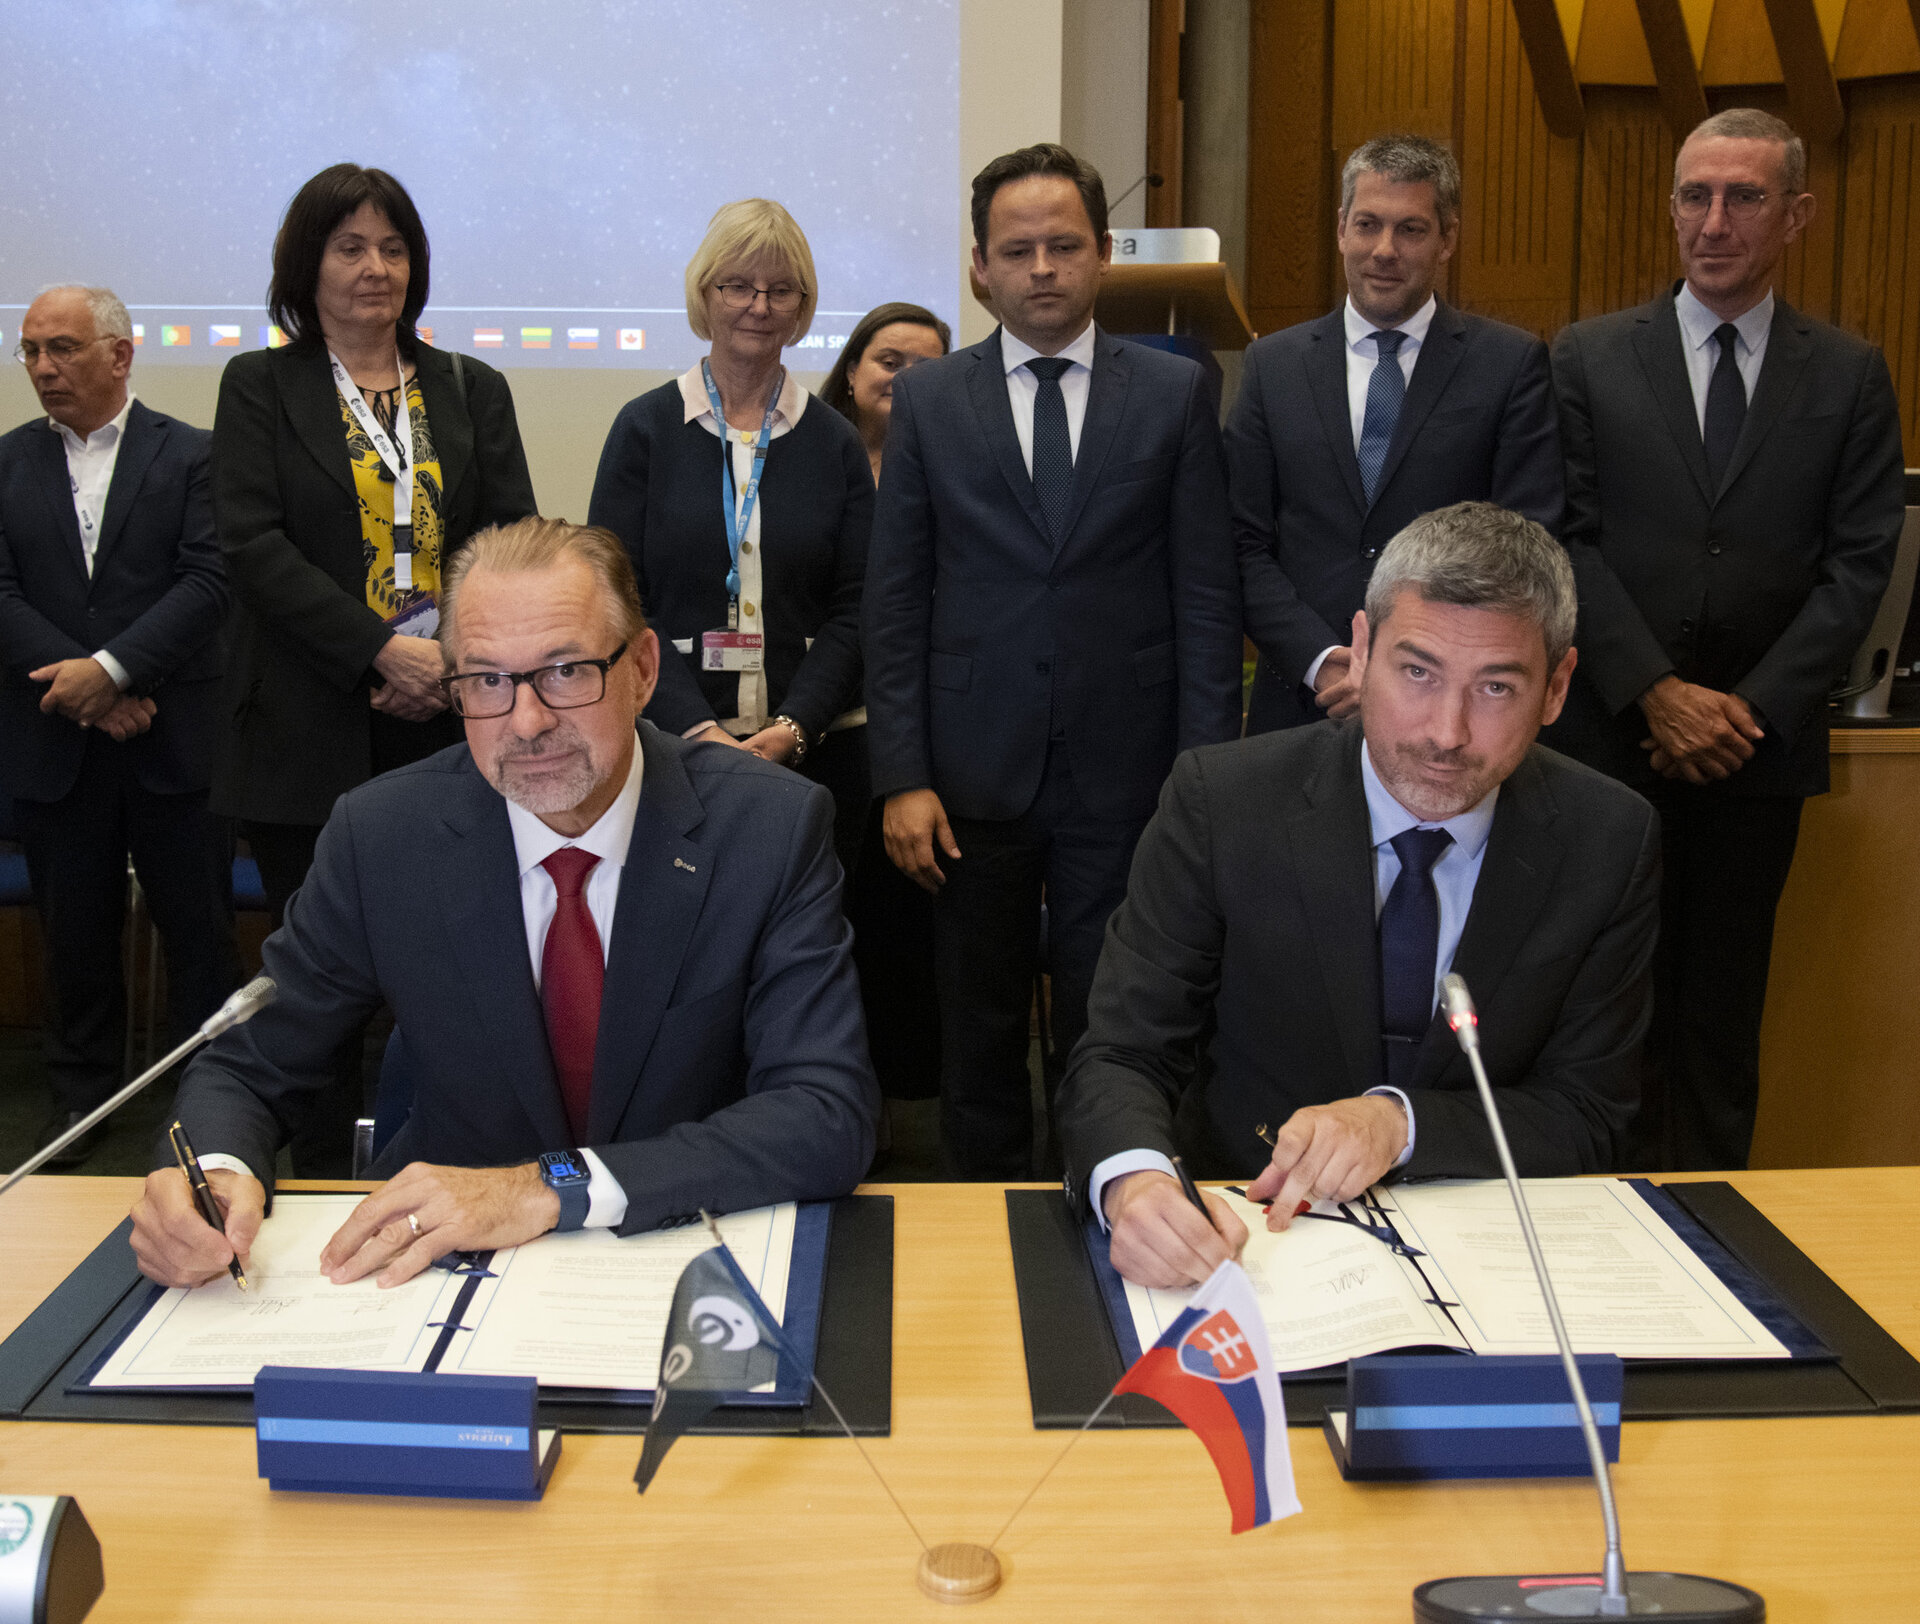 Signing the Association Agreement with Slovakia